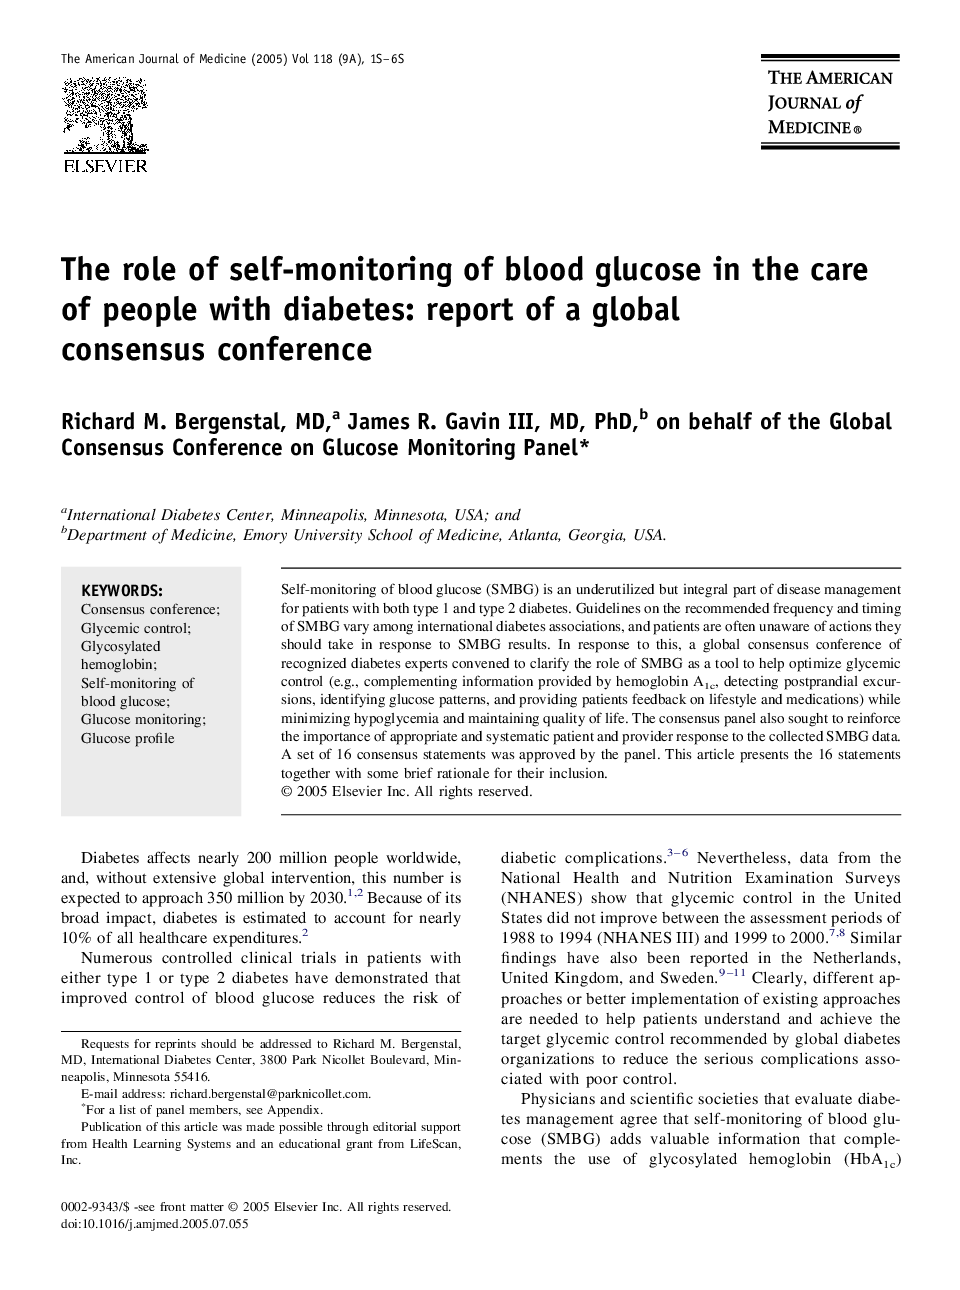 The role of self-monitoring of blood glucose in the care of people with diabetes: report of a global consensus conference